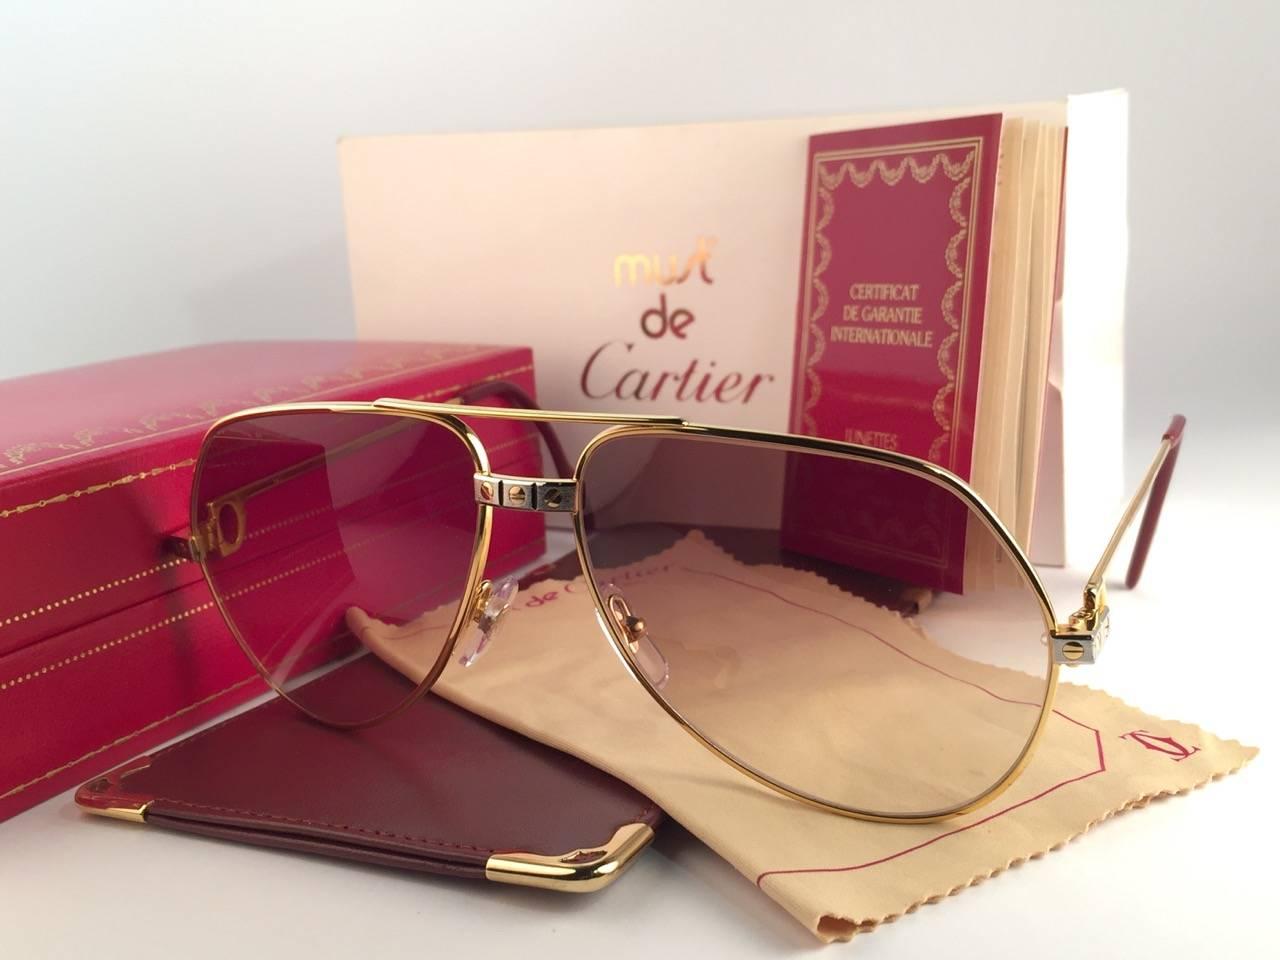 New from 1983!!! Cartier Aviator Santos Sunglasses with Brown Gradient (uv protection) Lenses.  Frame is with the famous screws on the front and sides in yellow and white gold. All hallmarks. Red enamel with Cartier gold signs on the ear paddles. 